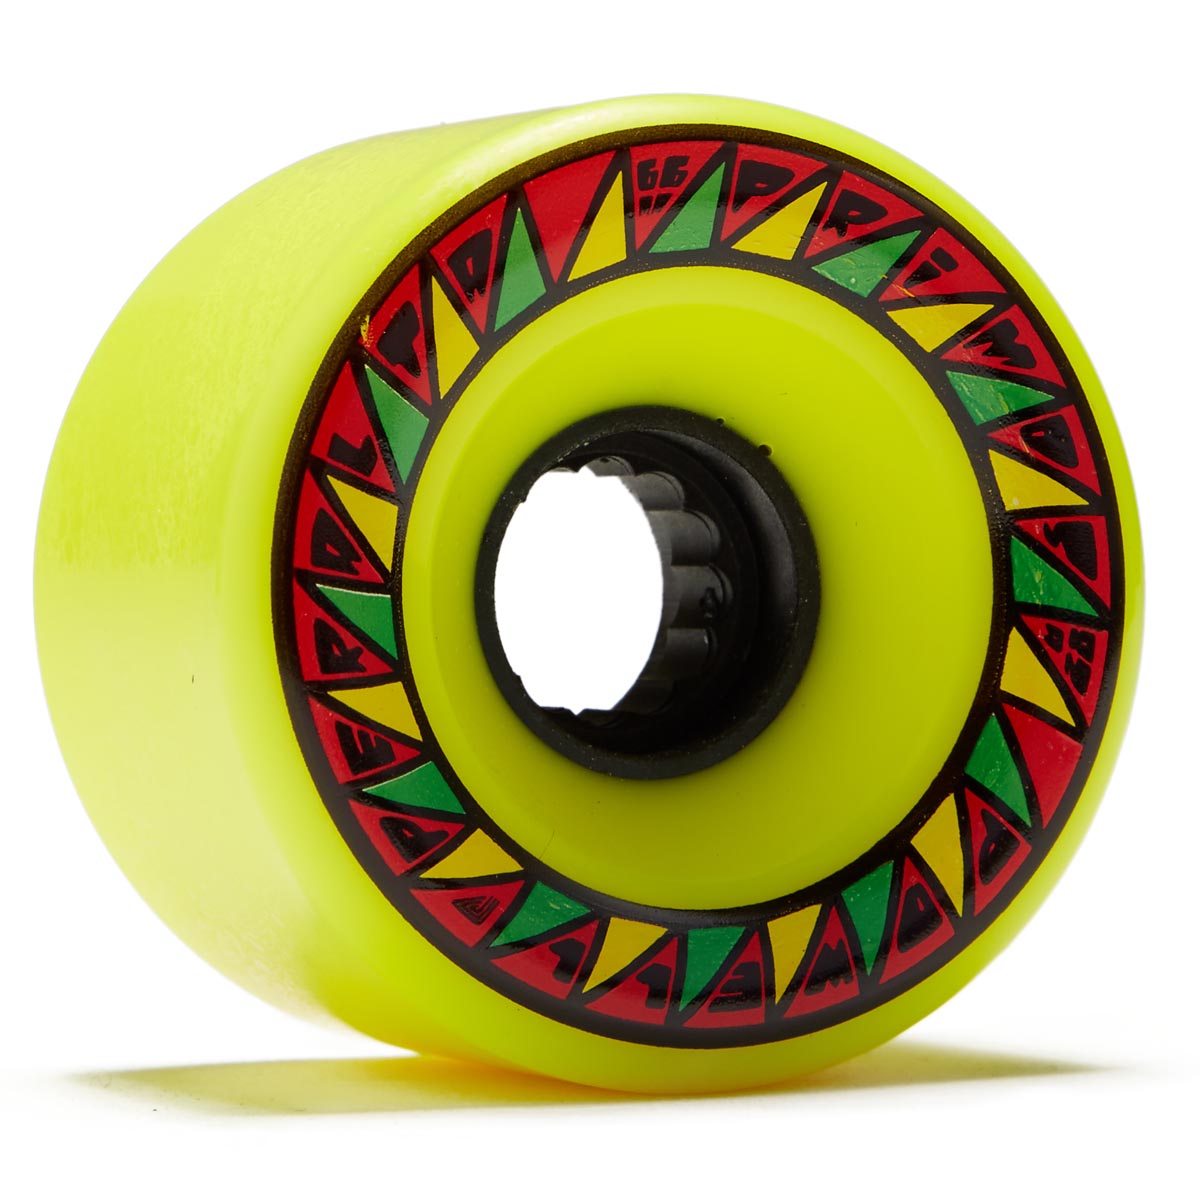 Powell-Peralta Primo 82a Longboard Wheels - Yellow - 66mm image 1